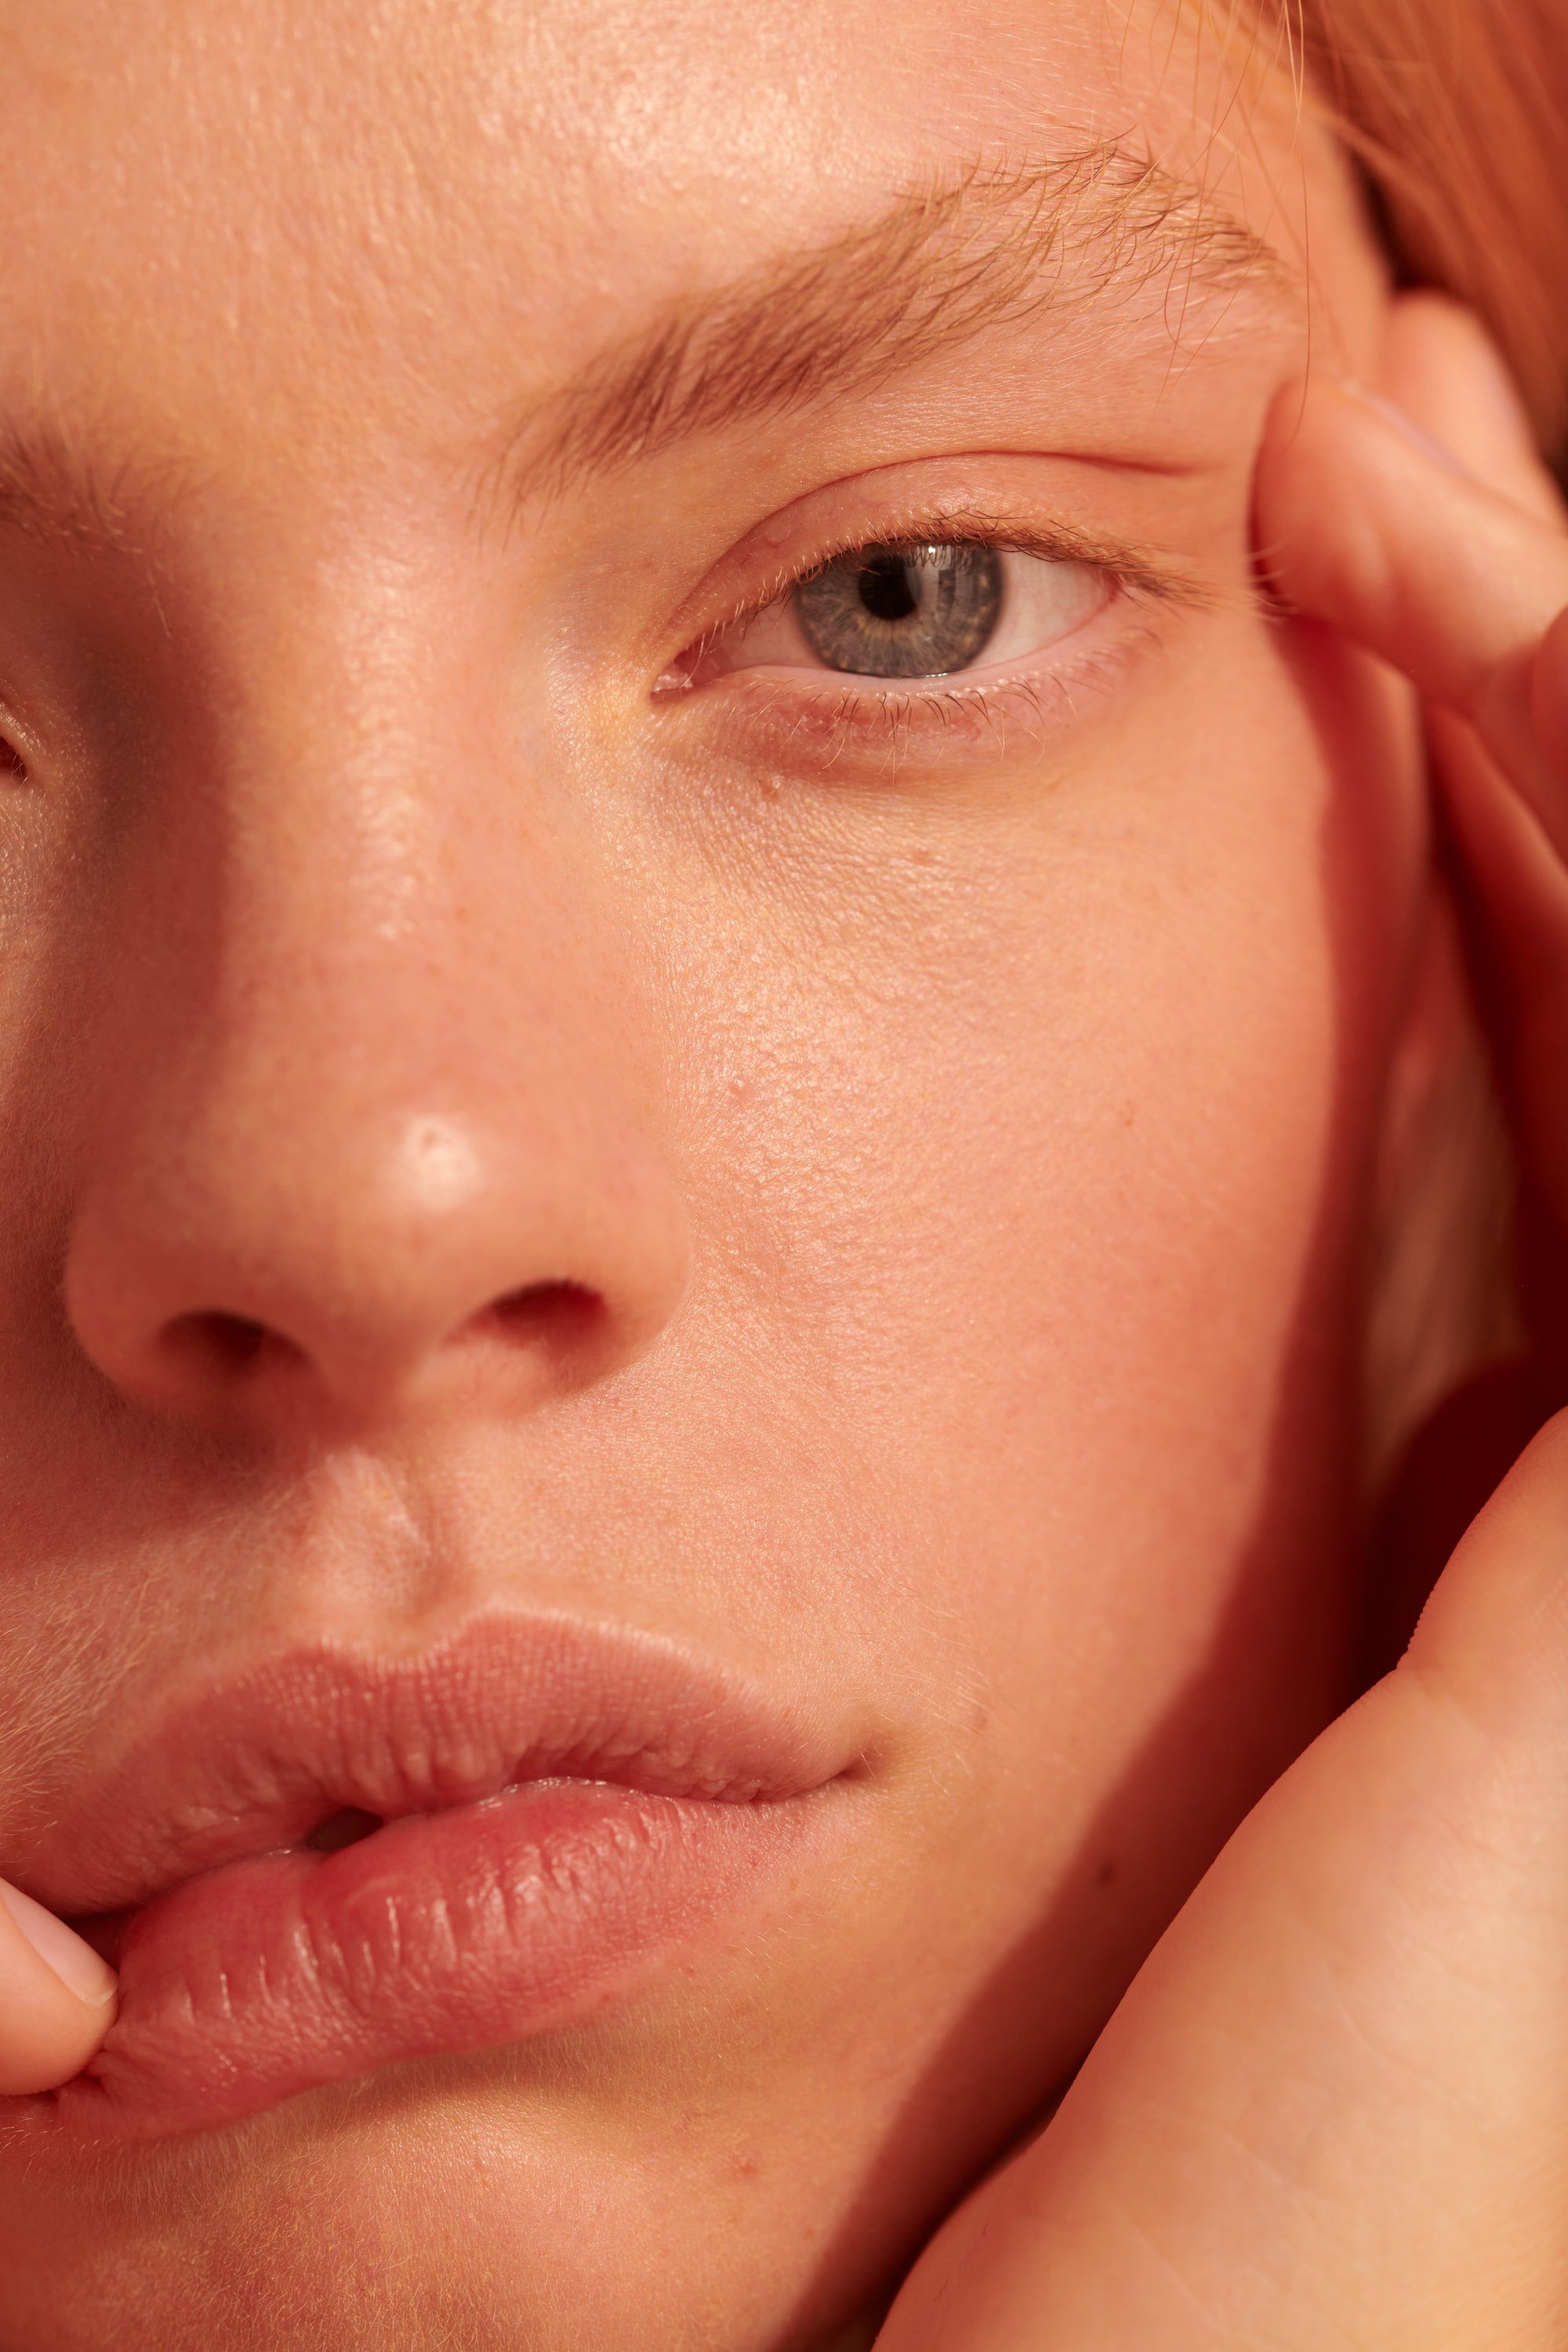 Sensitive skin: Causes and Triggers